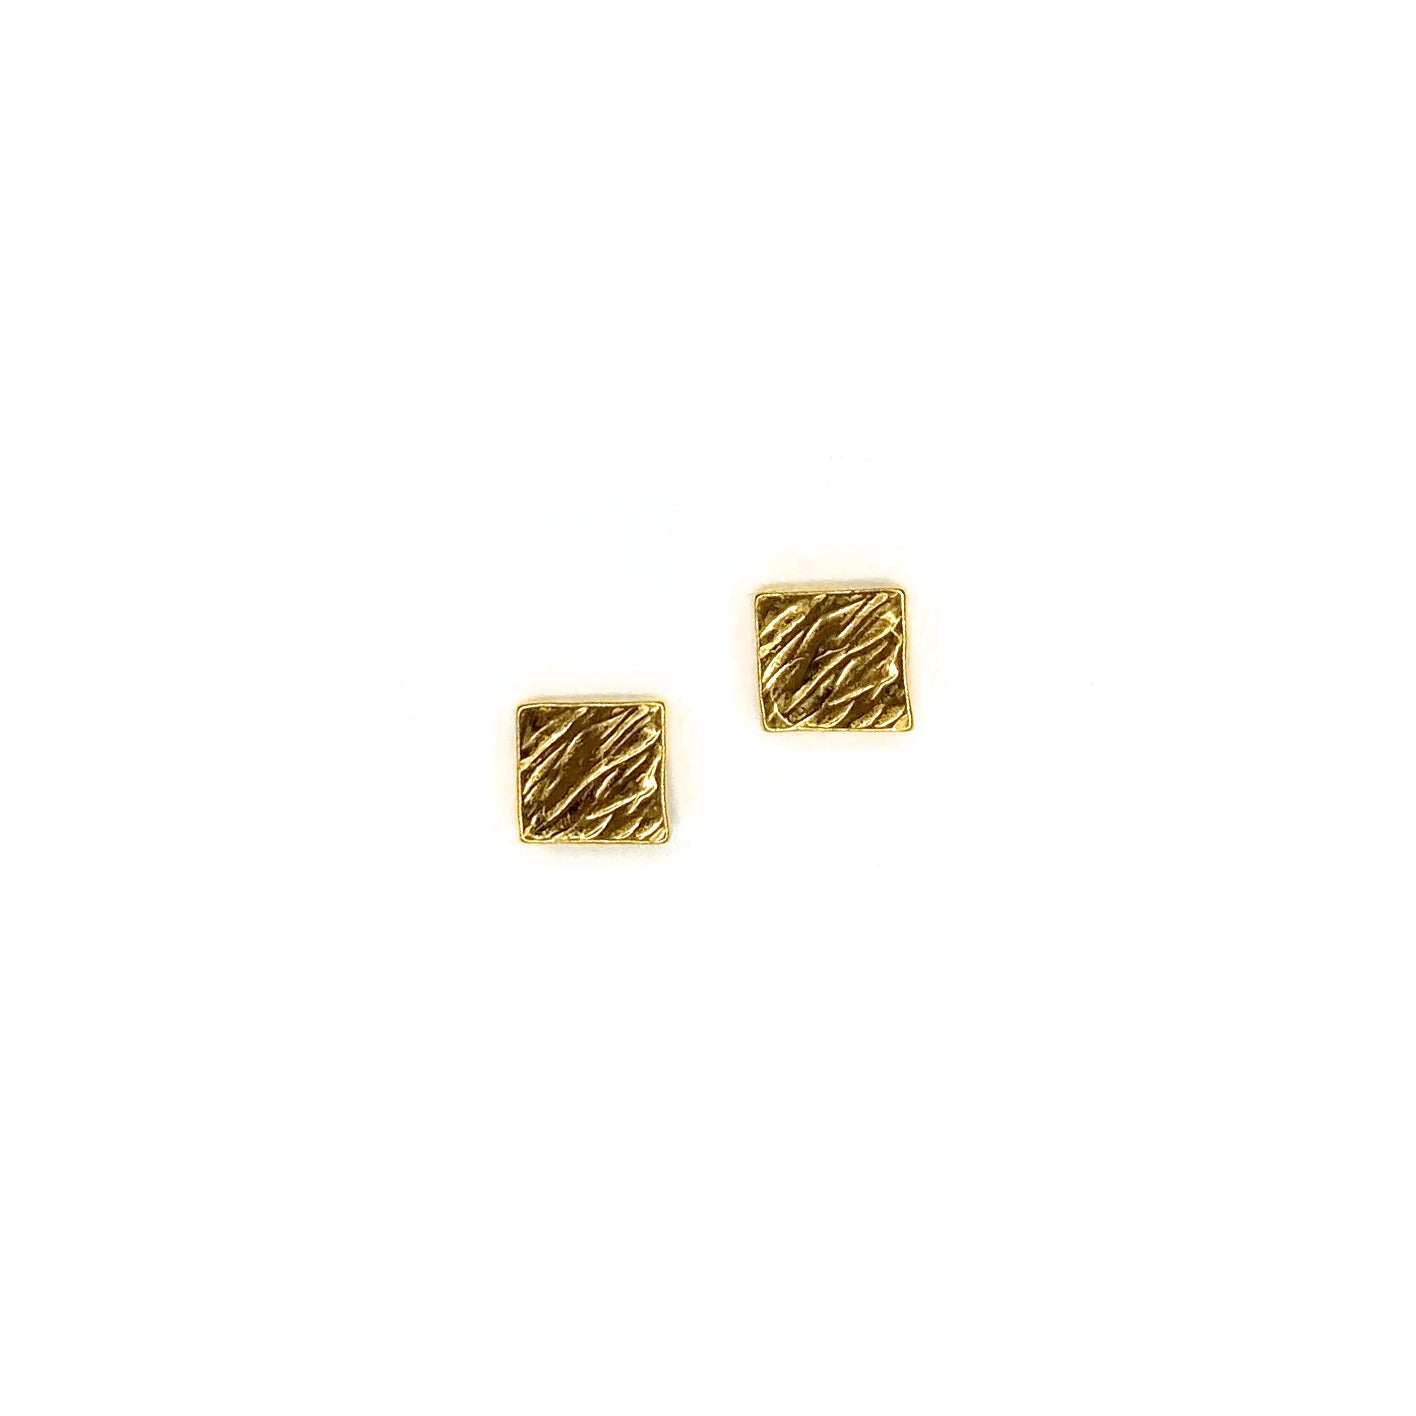 Pair of gold vermeil square studs with a hatched texture on a white background